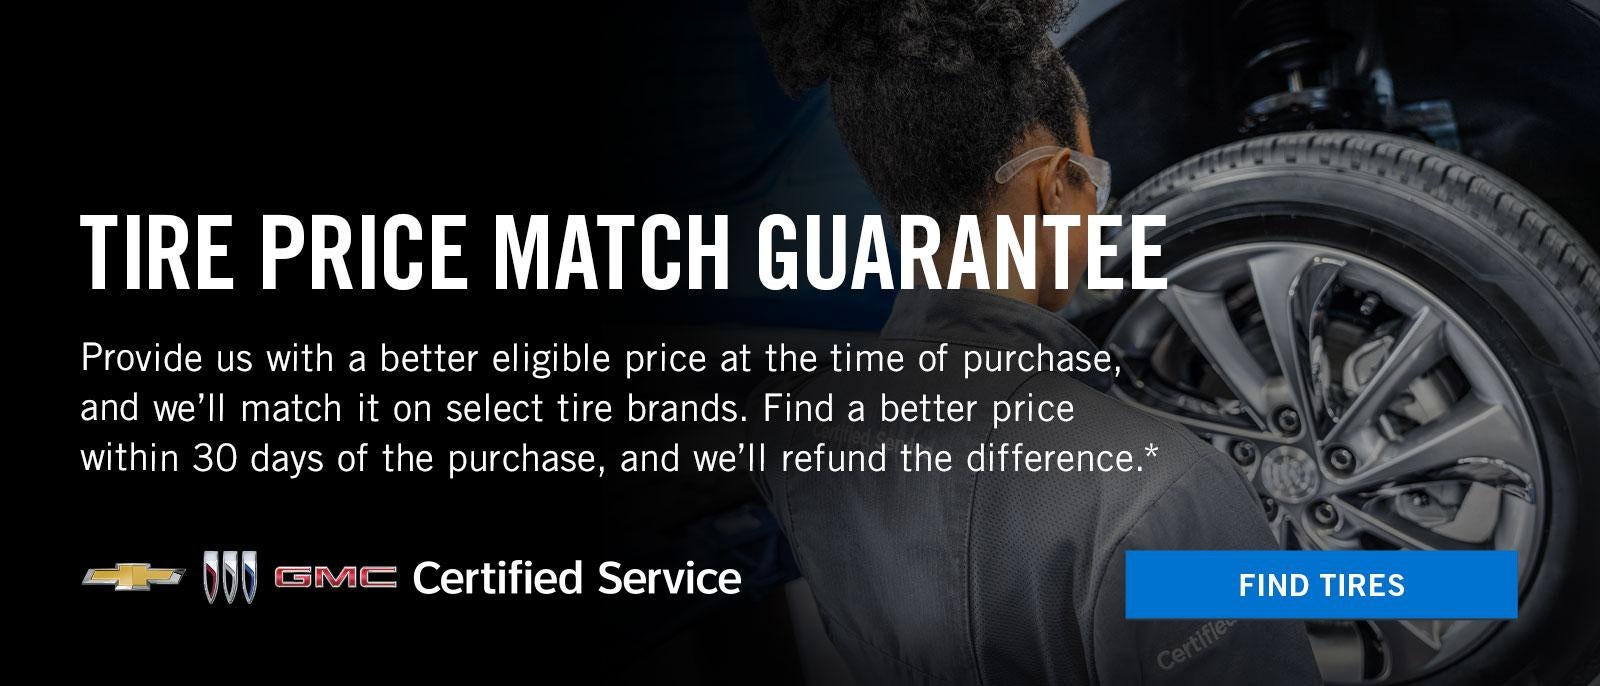 Tire Price Match Guarantee at Lipscomb Auto Center Bowie TX